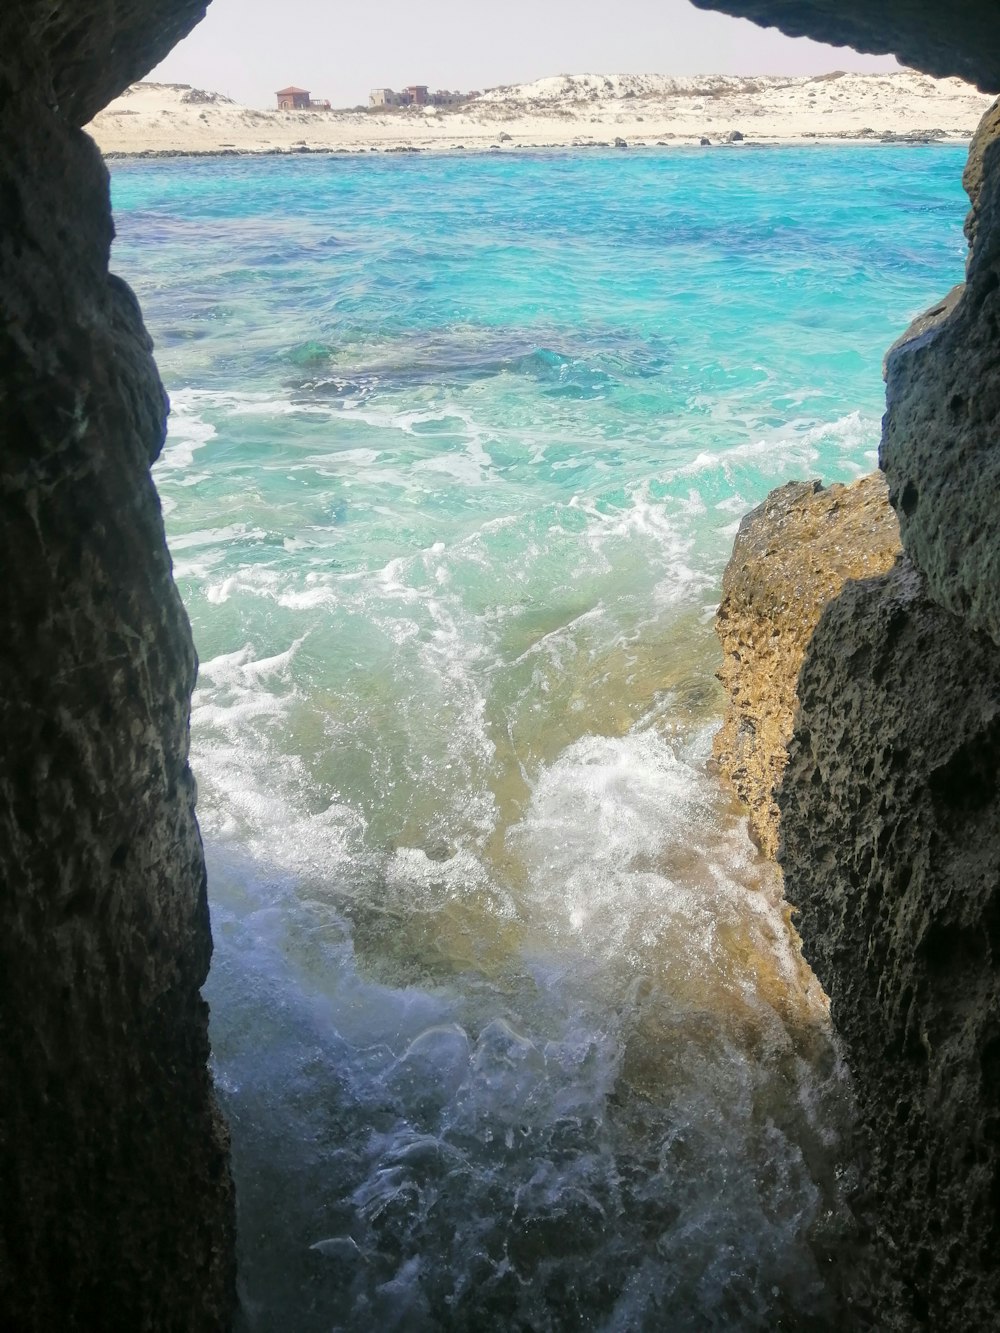 a view of a body of water from inside a cave